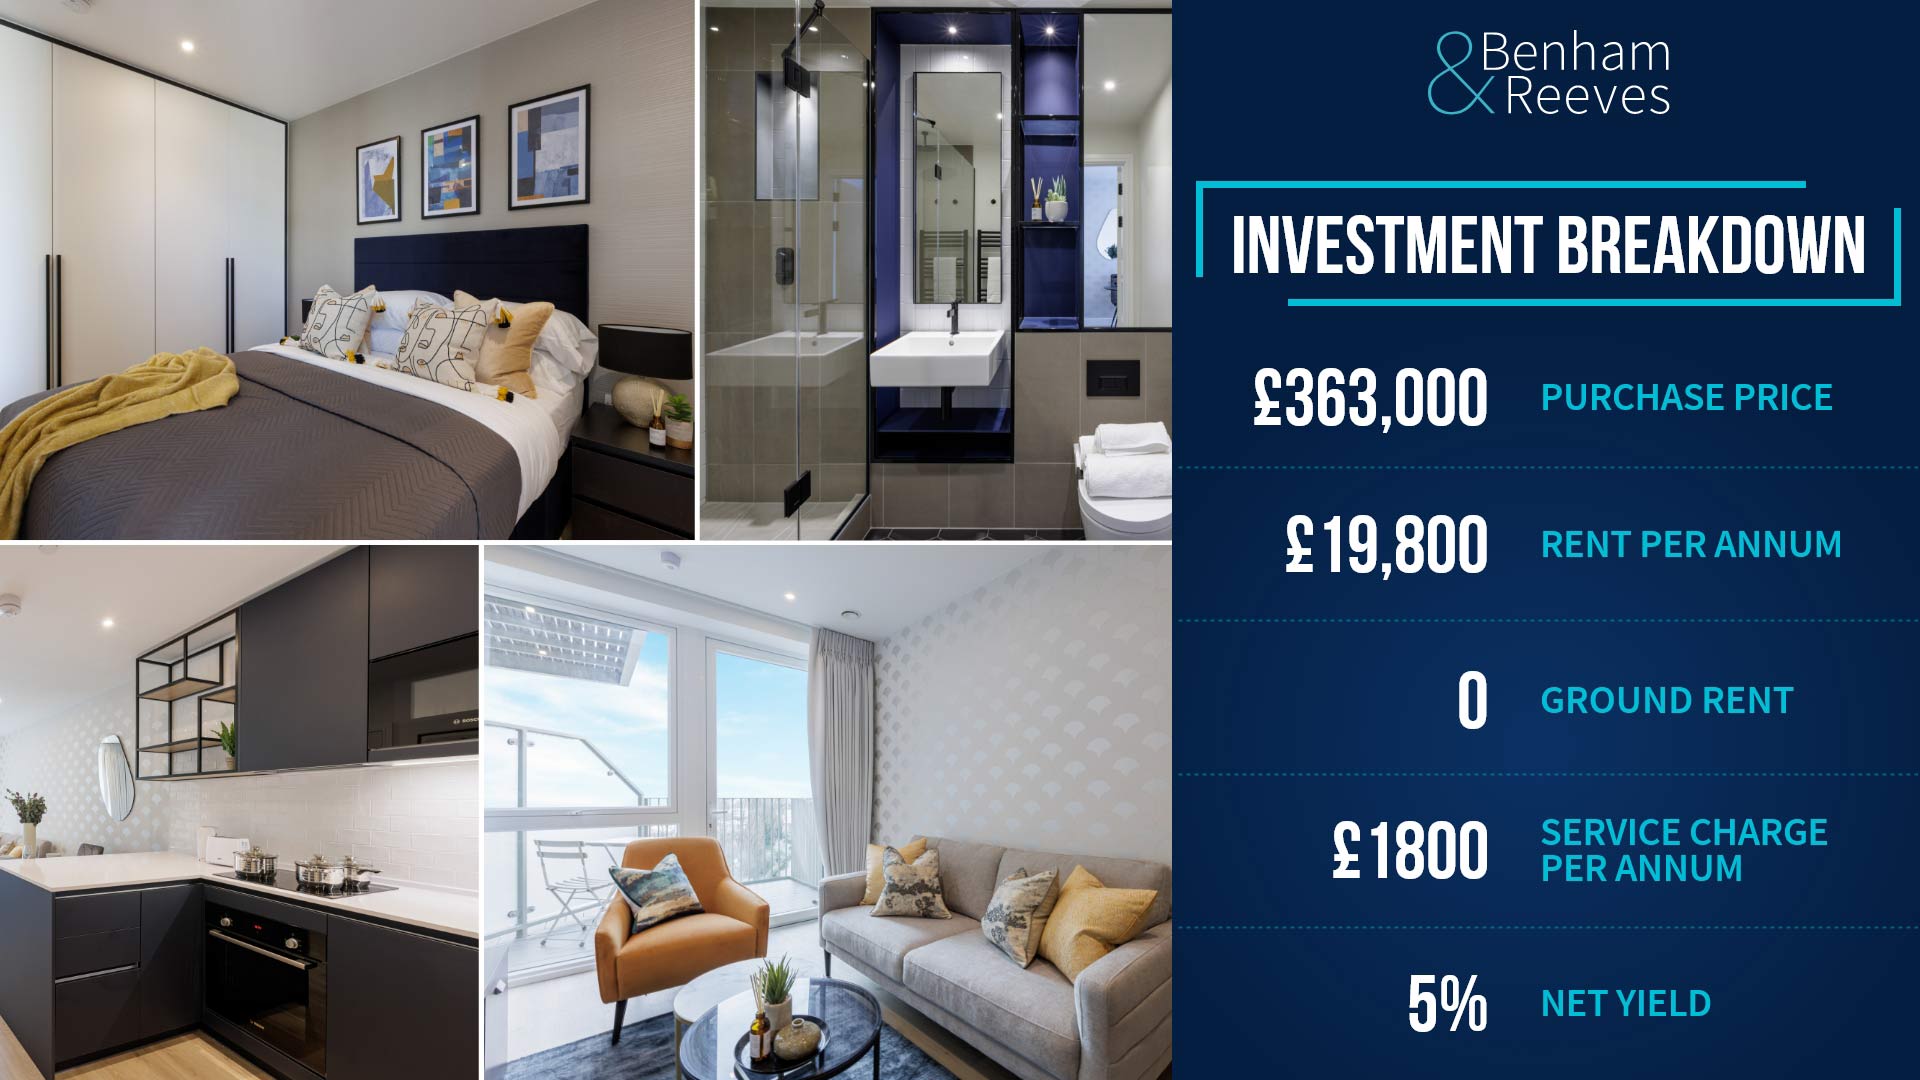 SUCCESS STORY: Our Comprehensive Property Service Proves a Hit with Investors